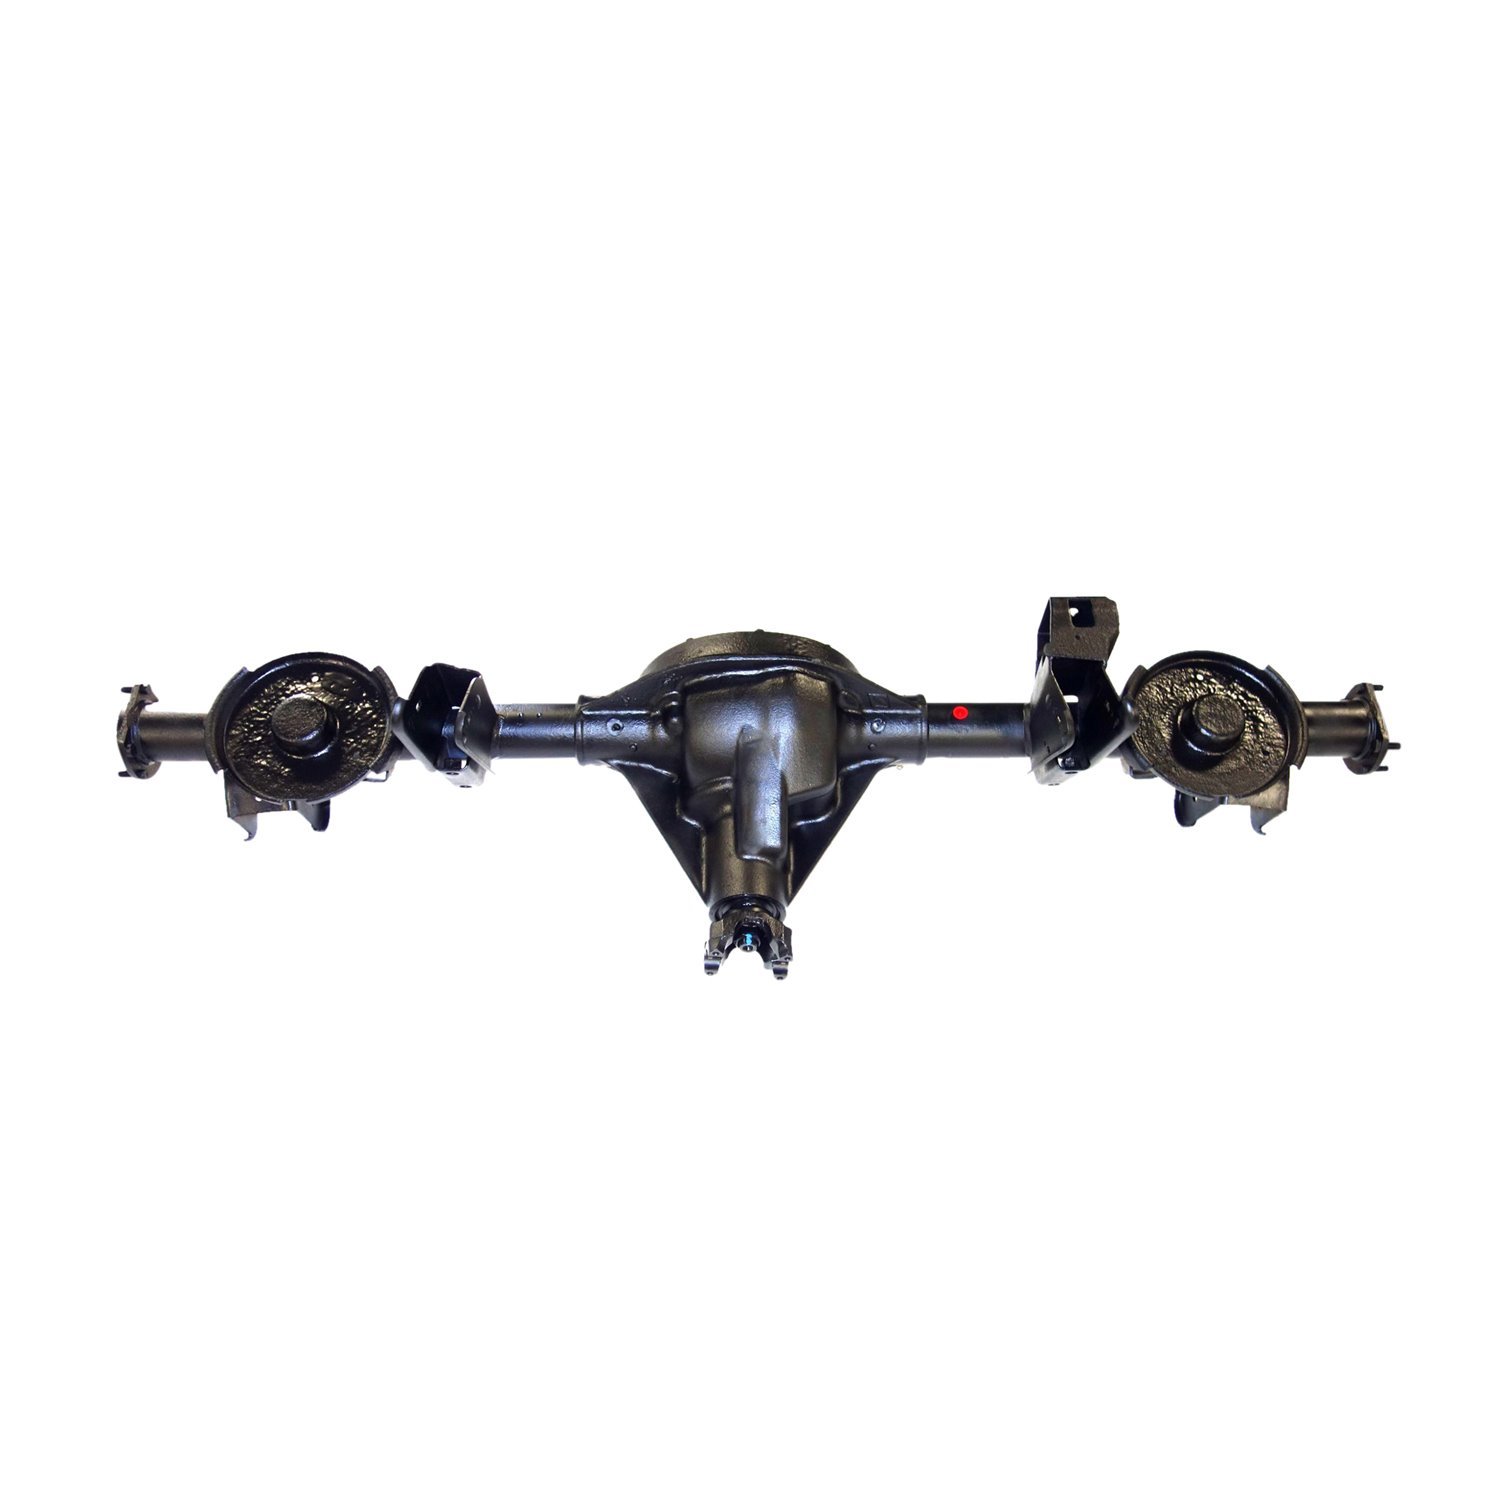 Remanufactured Rear Axle Assy D35 1997-2002 Wrangler 3.73 w/out ABS